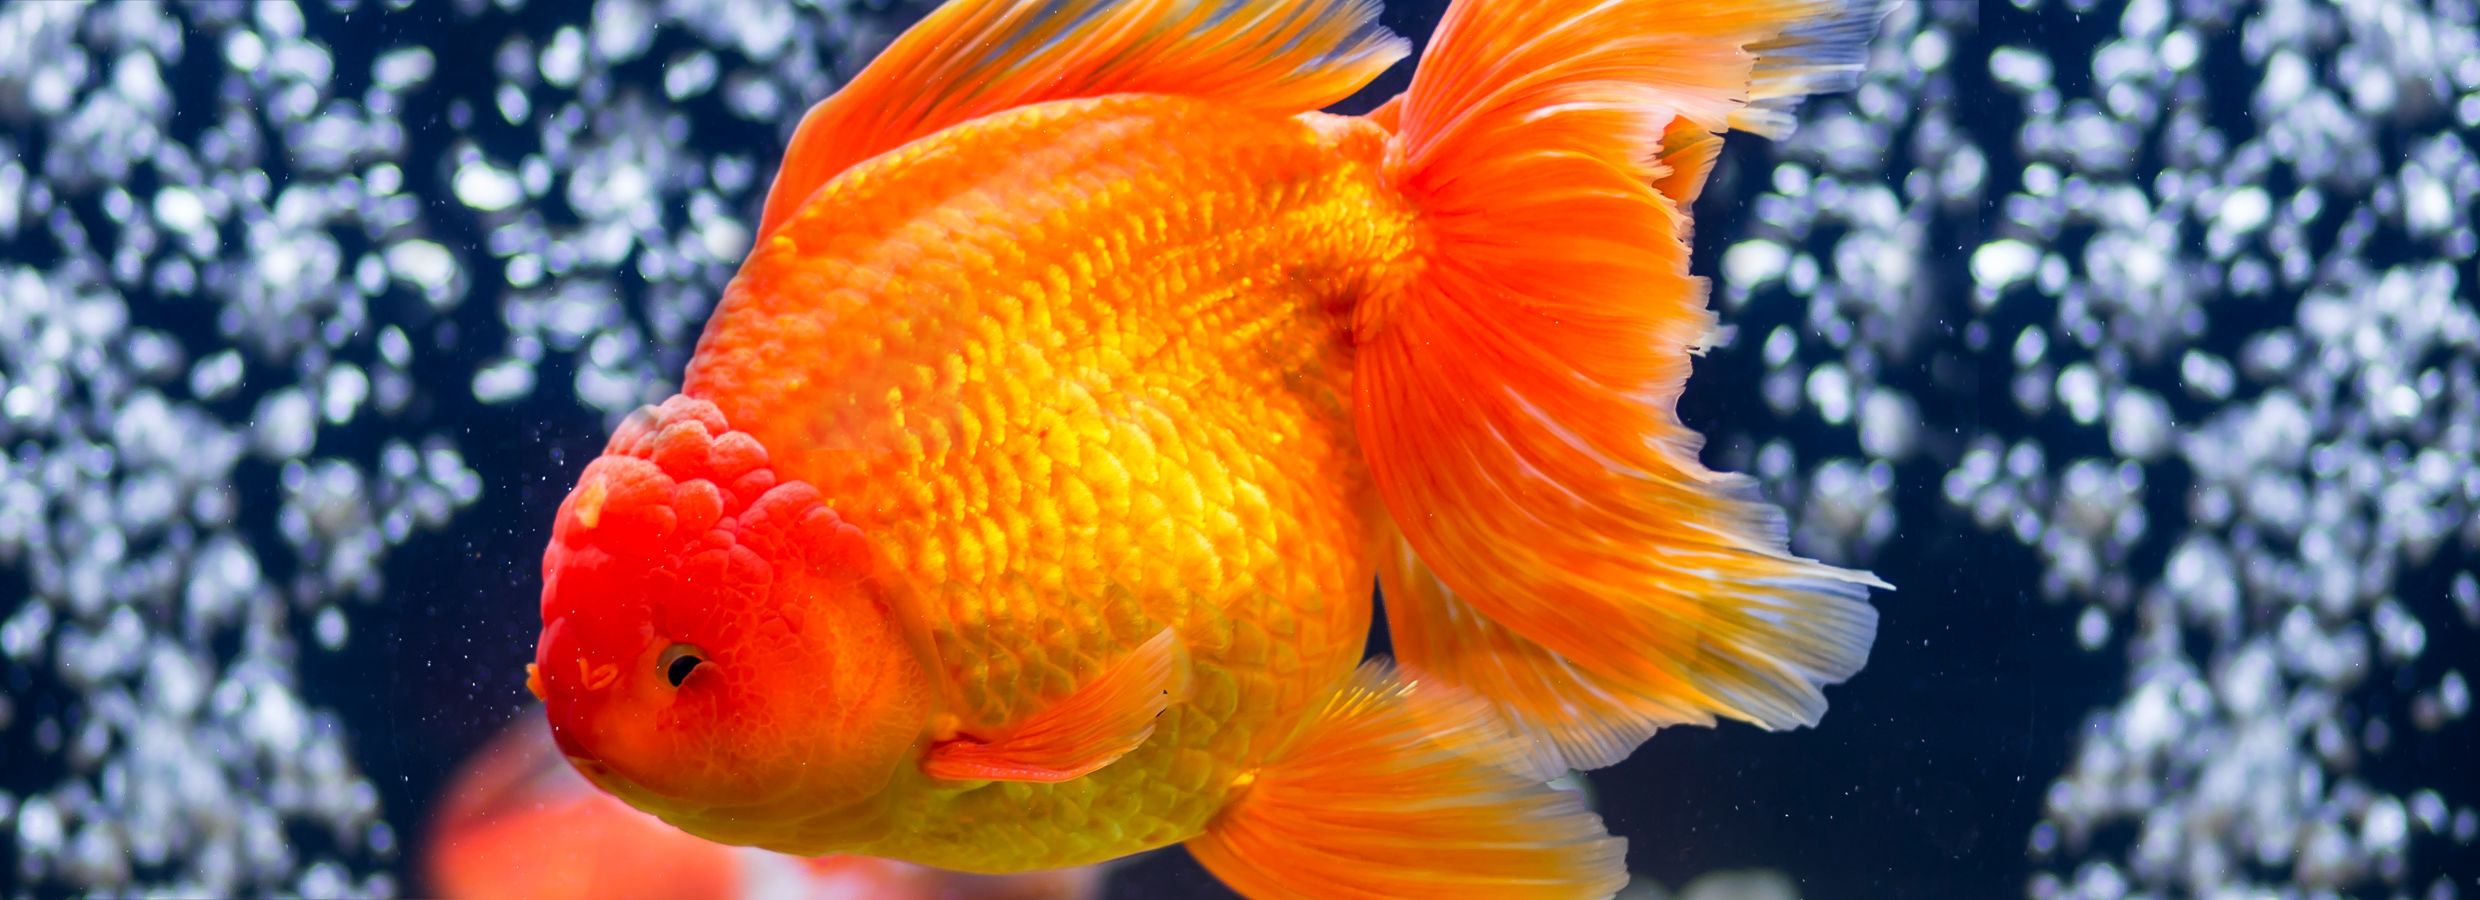 How To Take Care Of Goldfish